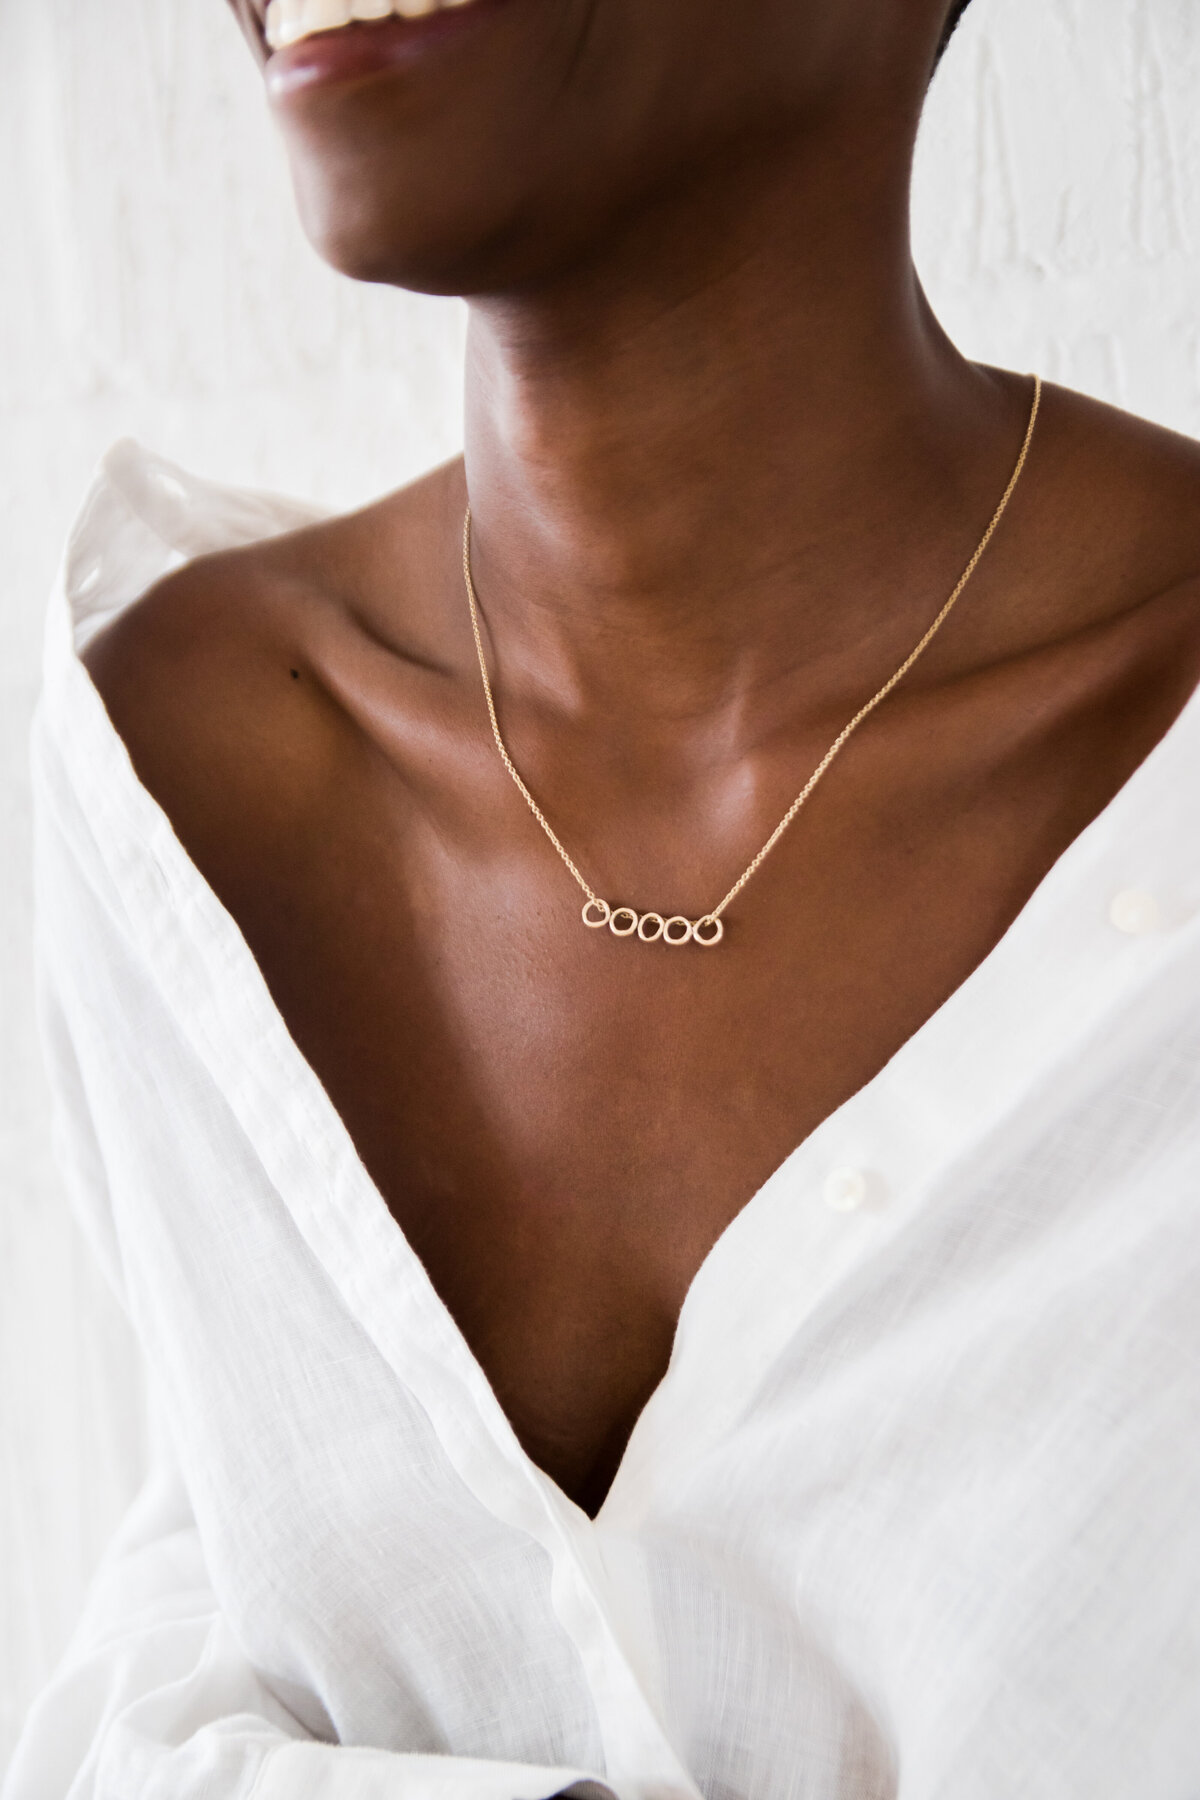 websize-esther-allen-jewellery-brand-shoot-stories-by-chloe-photography-19